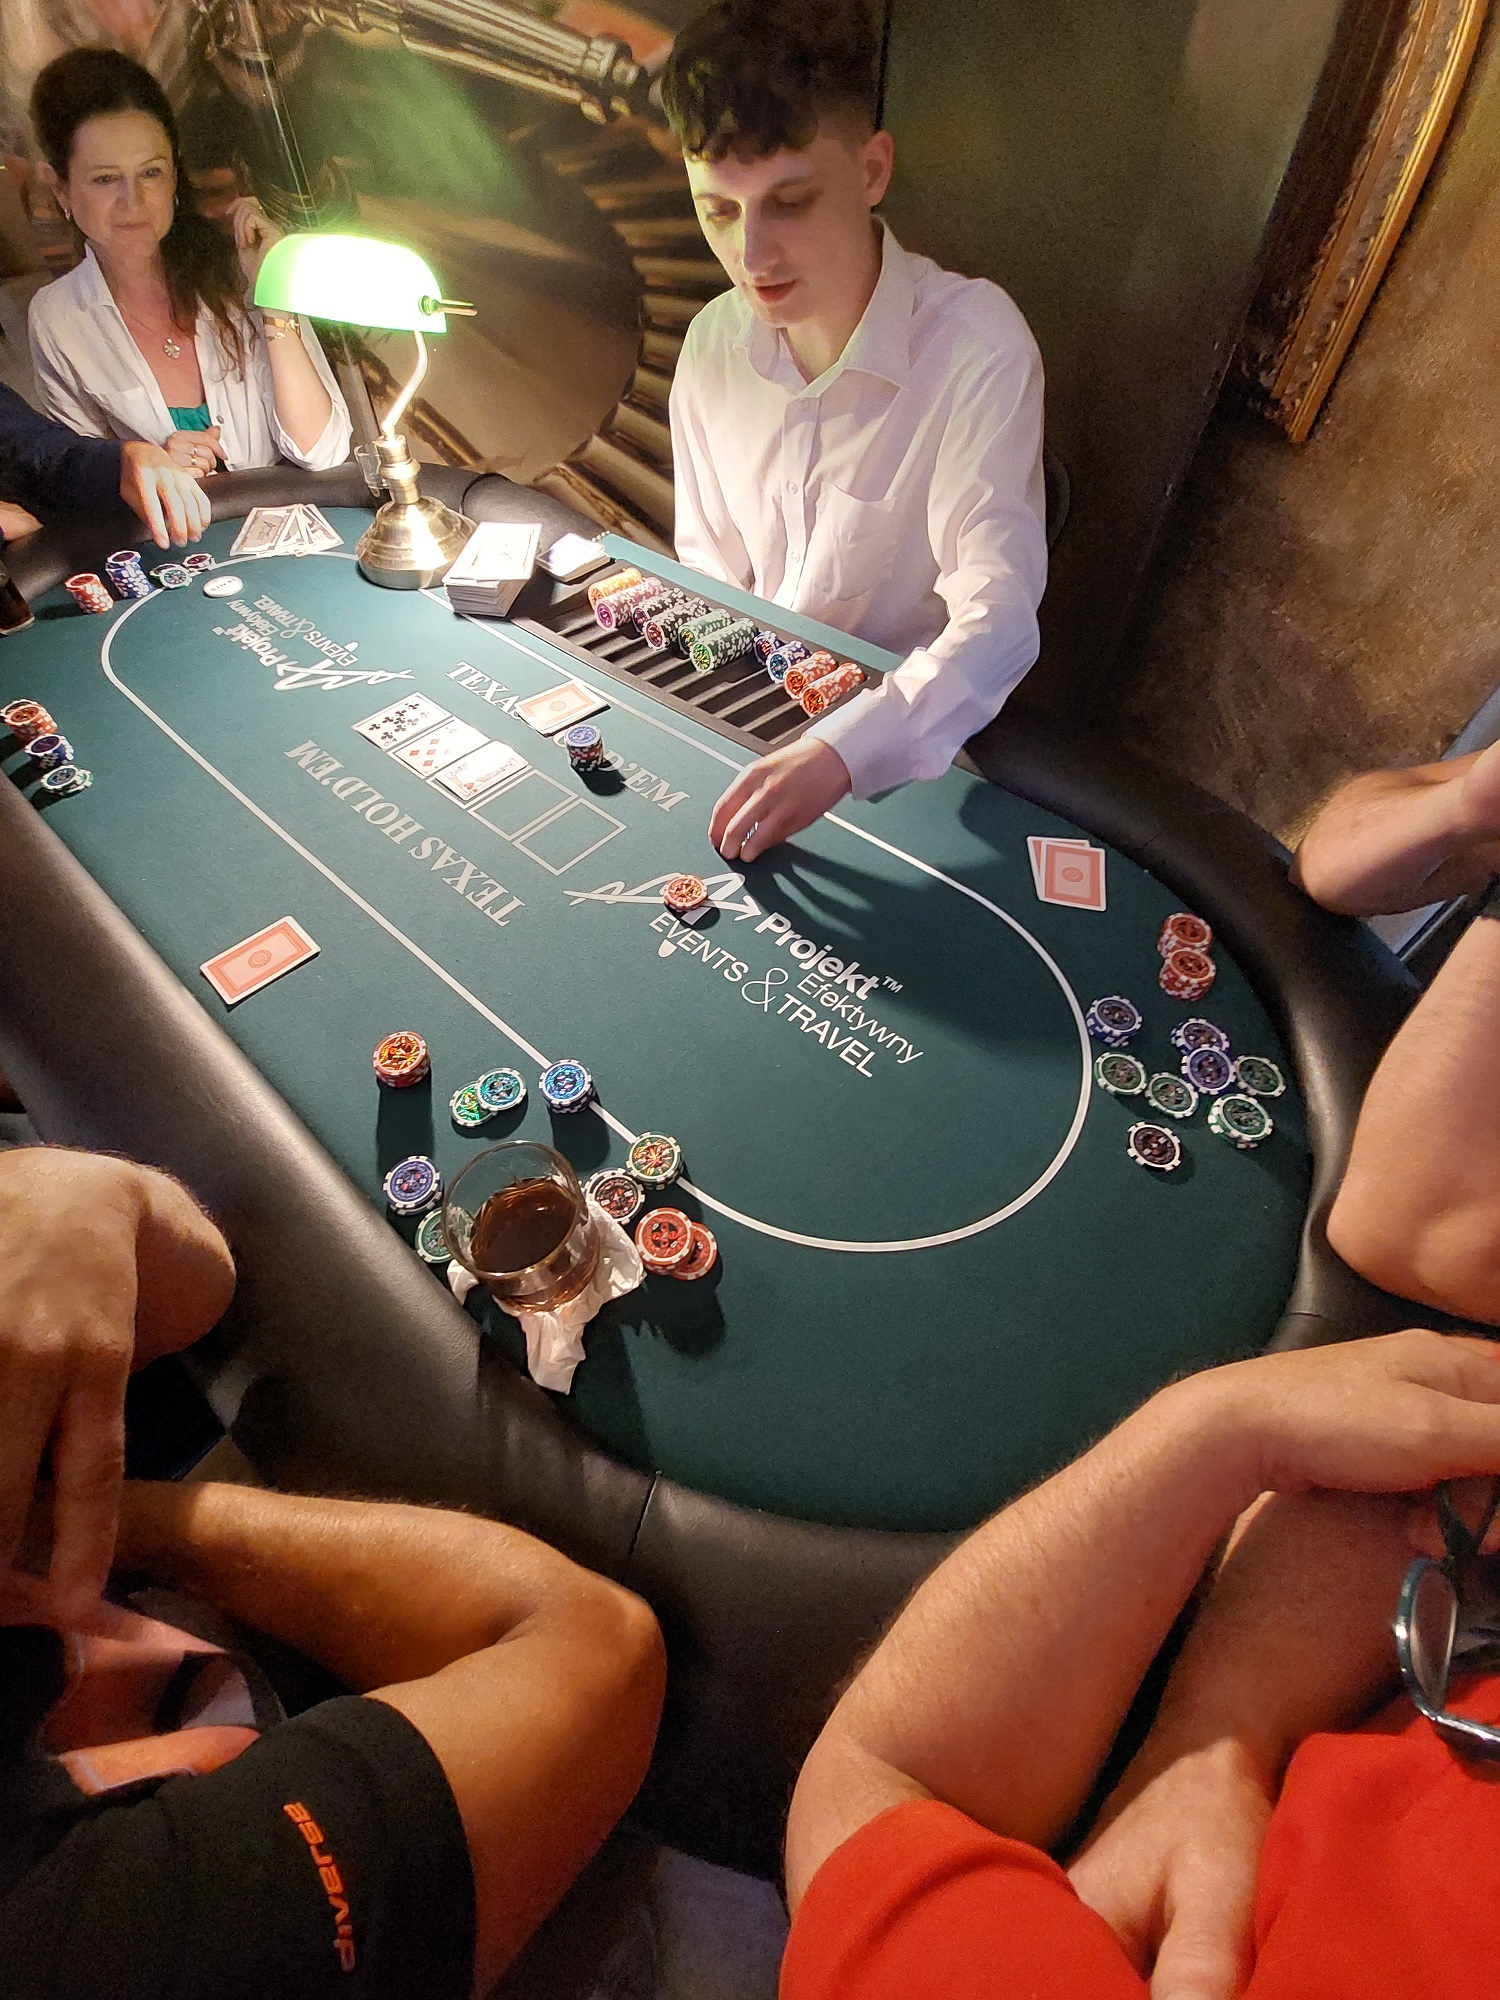 Attractions for corporate events - casino